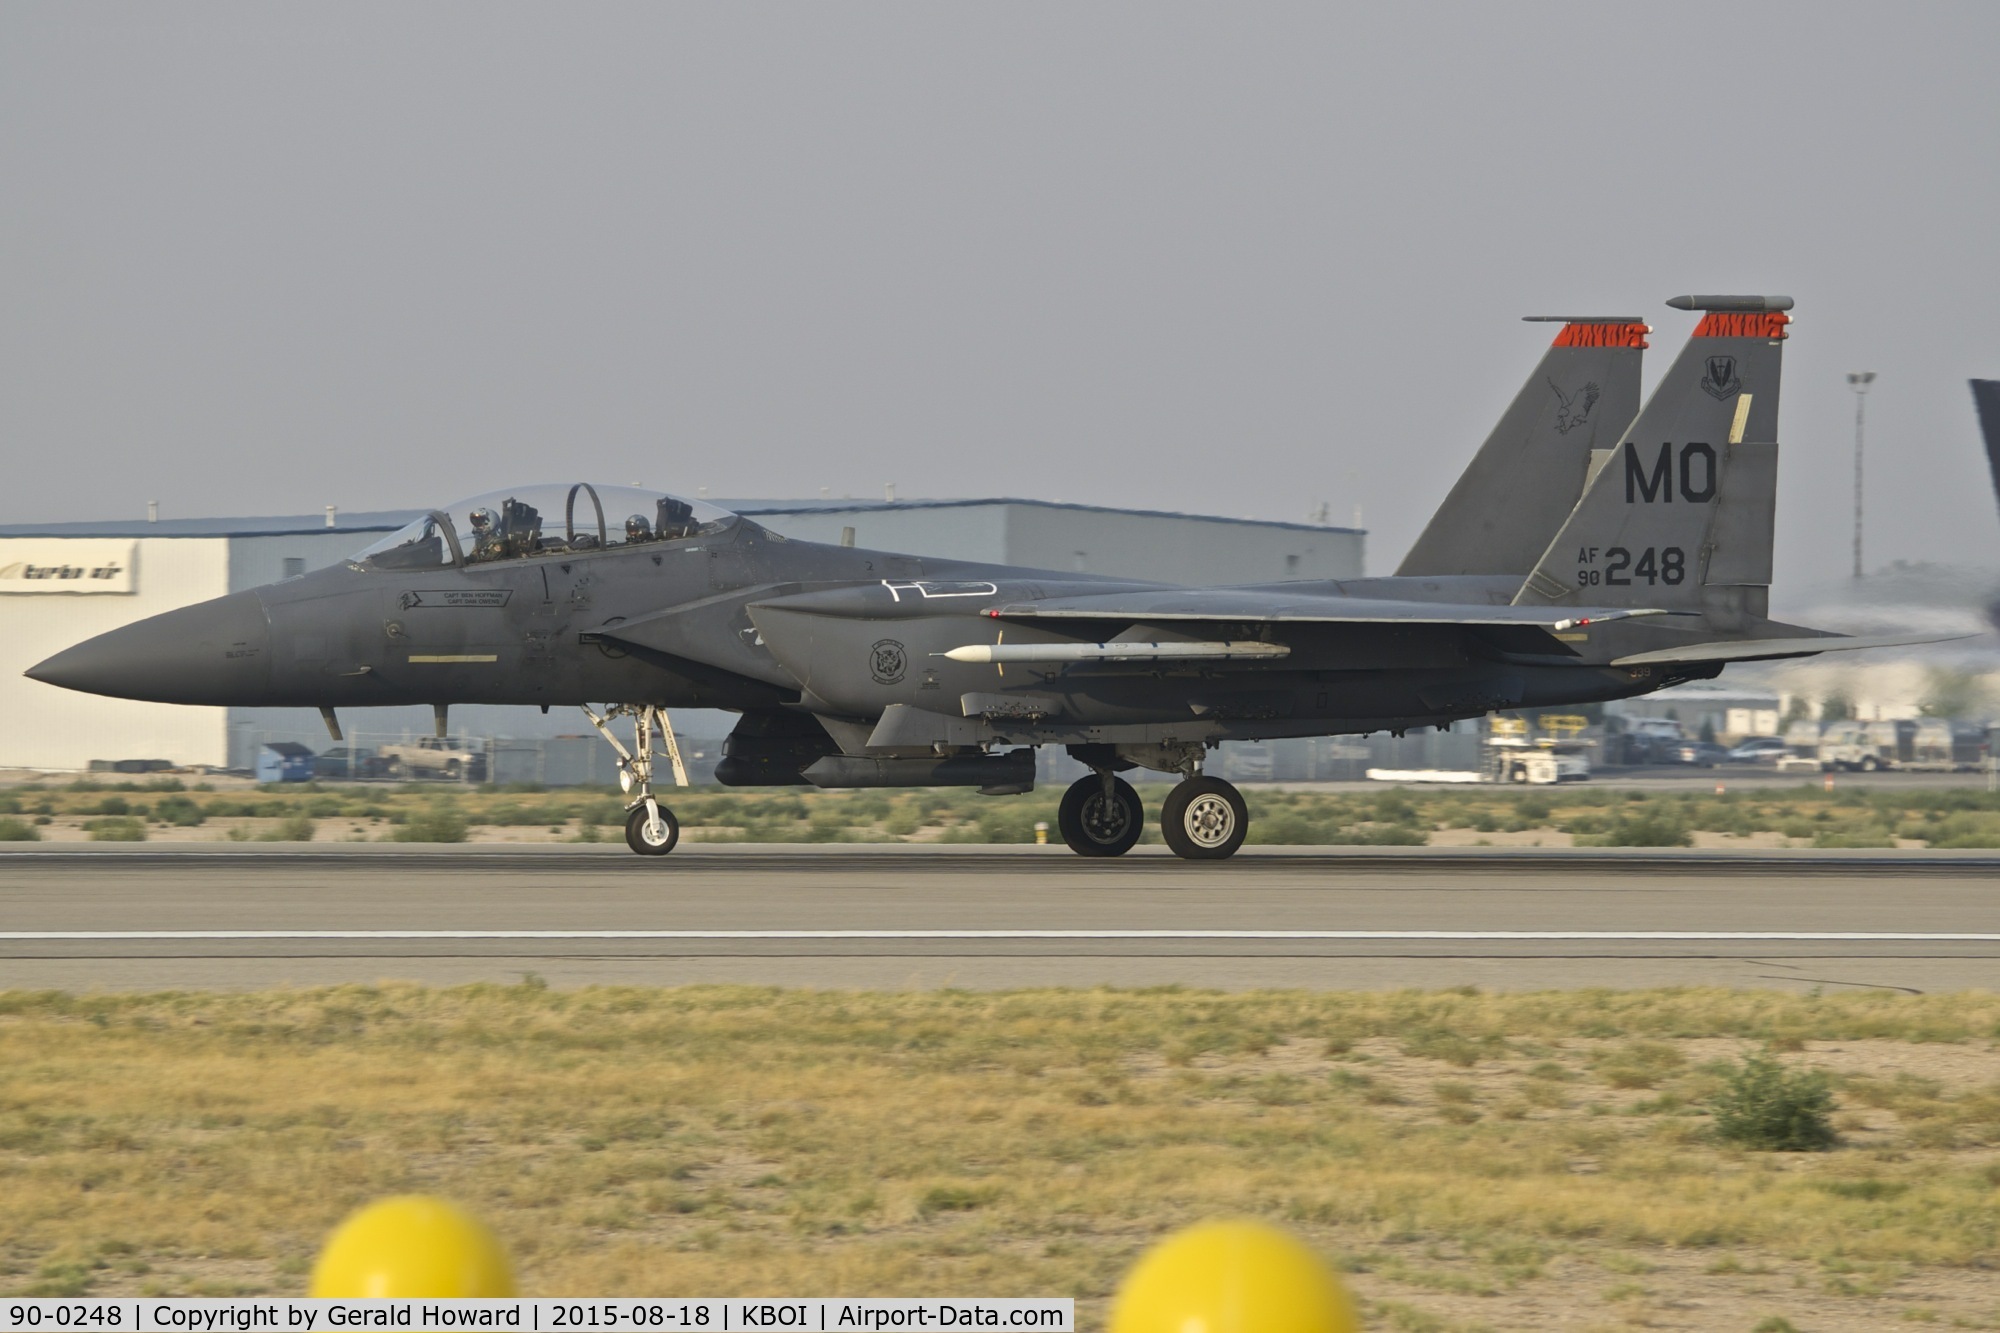 90-0248, 1990 McDonnell Douglas F-15E Strike Eagle C/N 1183/E150, Starting take off roll on RWY 10R. 391st Fighter Sq.“Bold Tigers”, 366th Fighter Wing, Mountain Home AFB, Idaho.